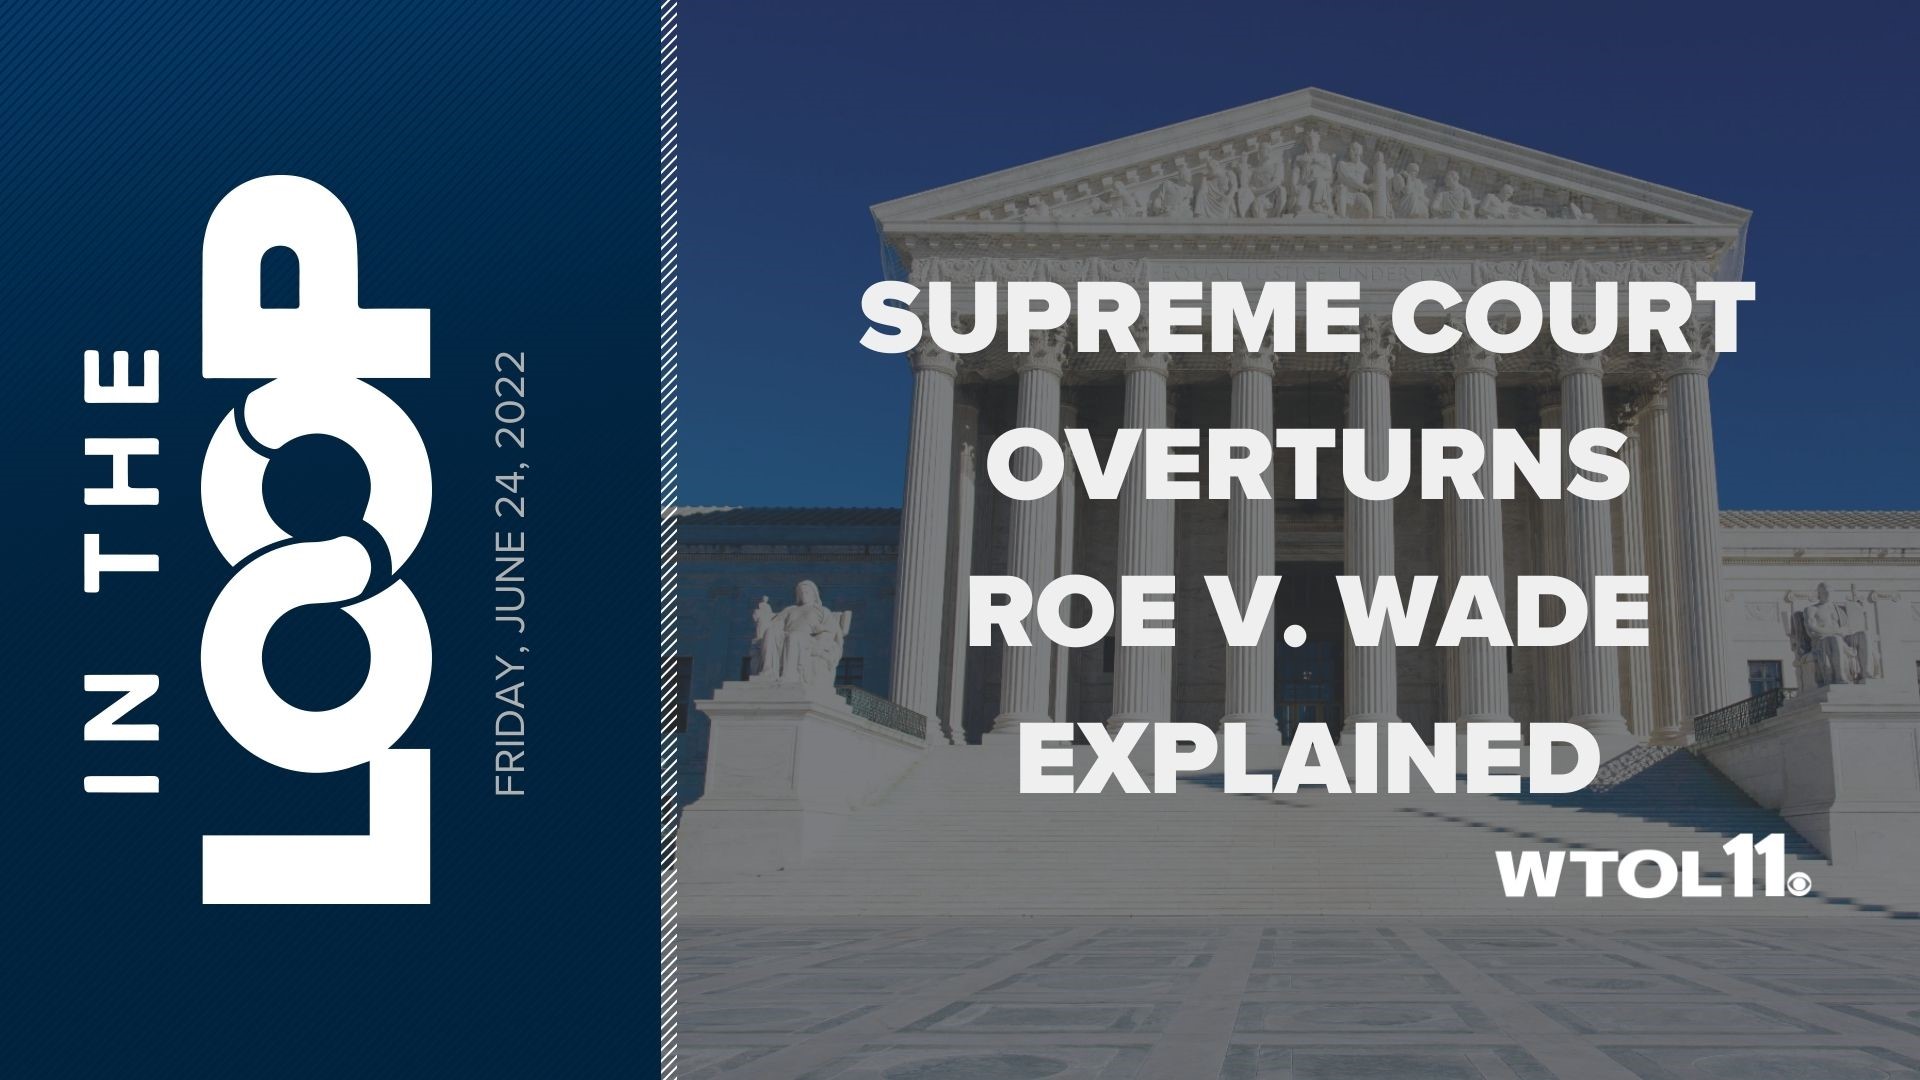 A history of the landmark case Roe v. Wade and what led up to it being overturned.